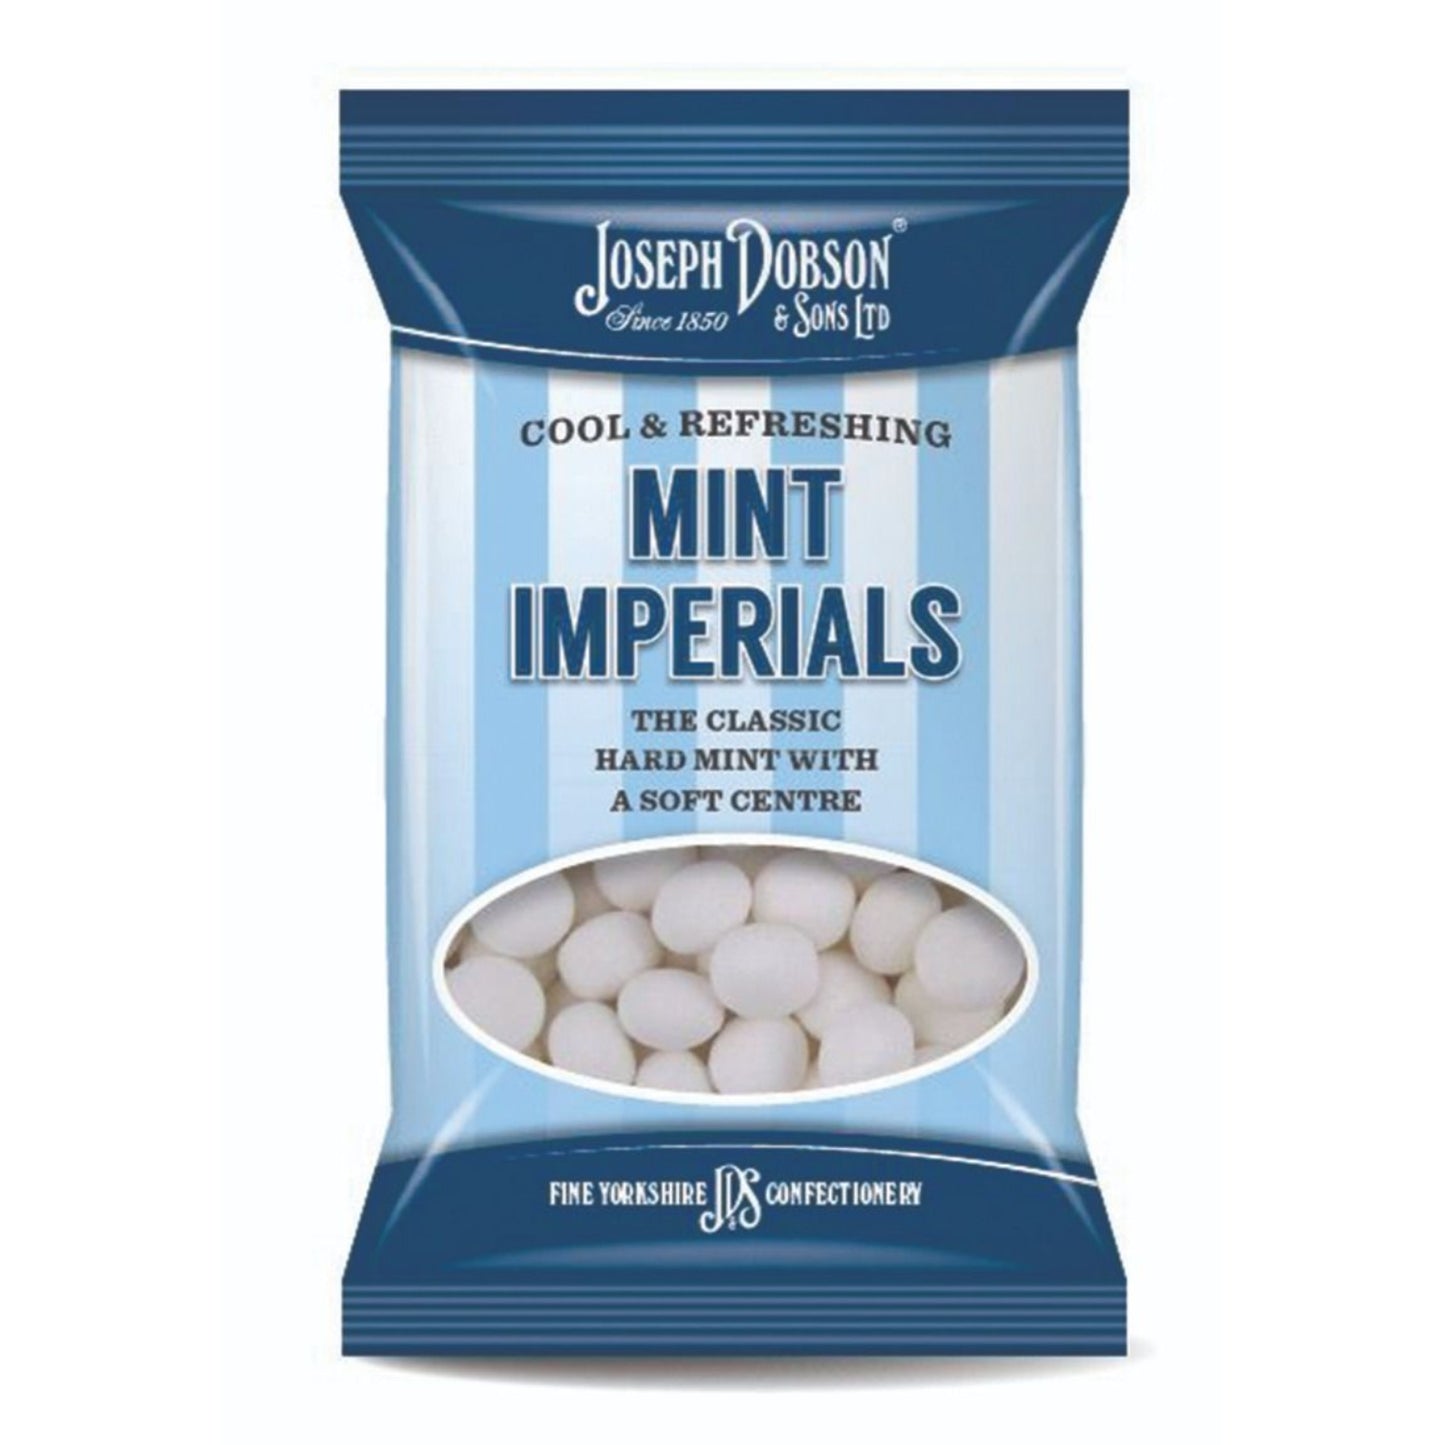 Mint Imperials 200g Bag - The Great Yorkshire Shop